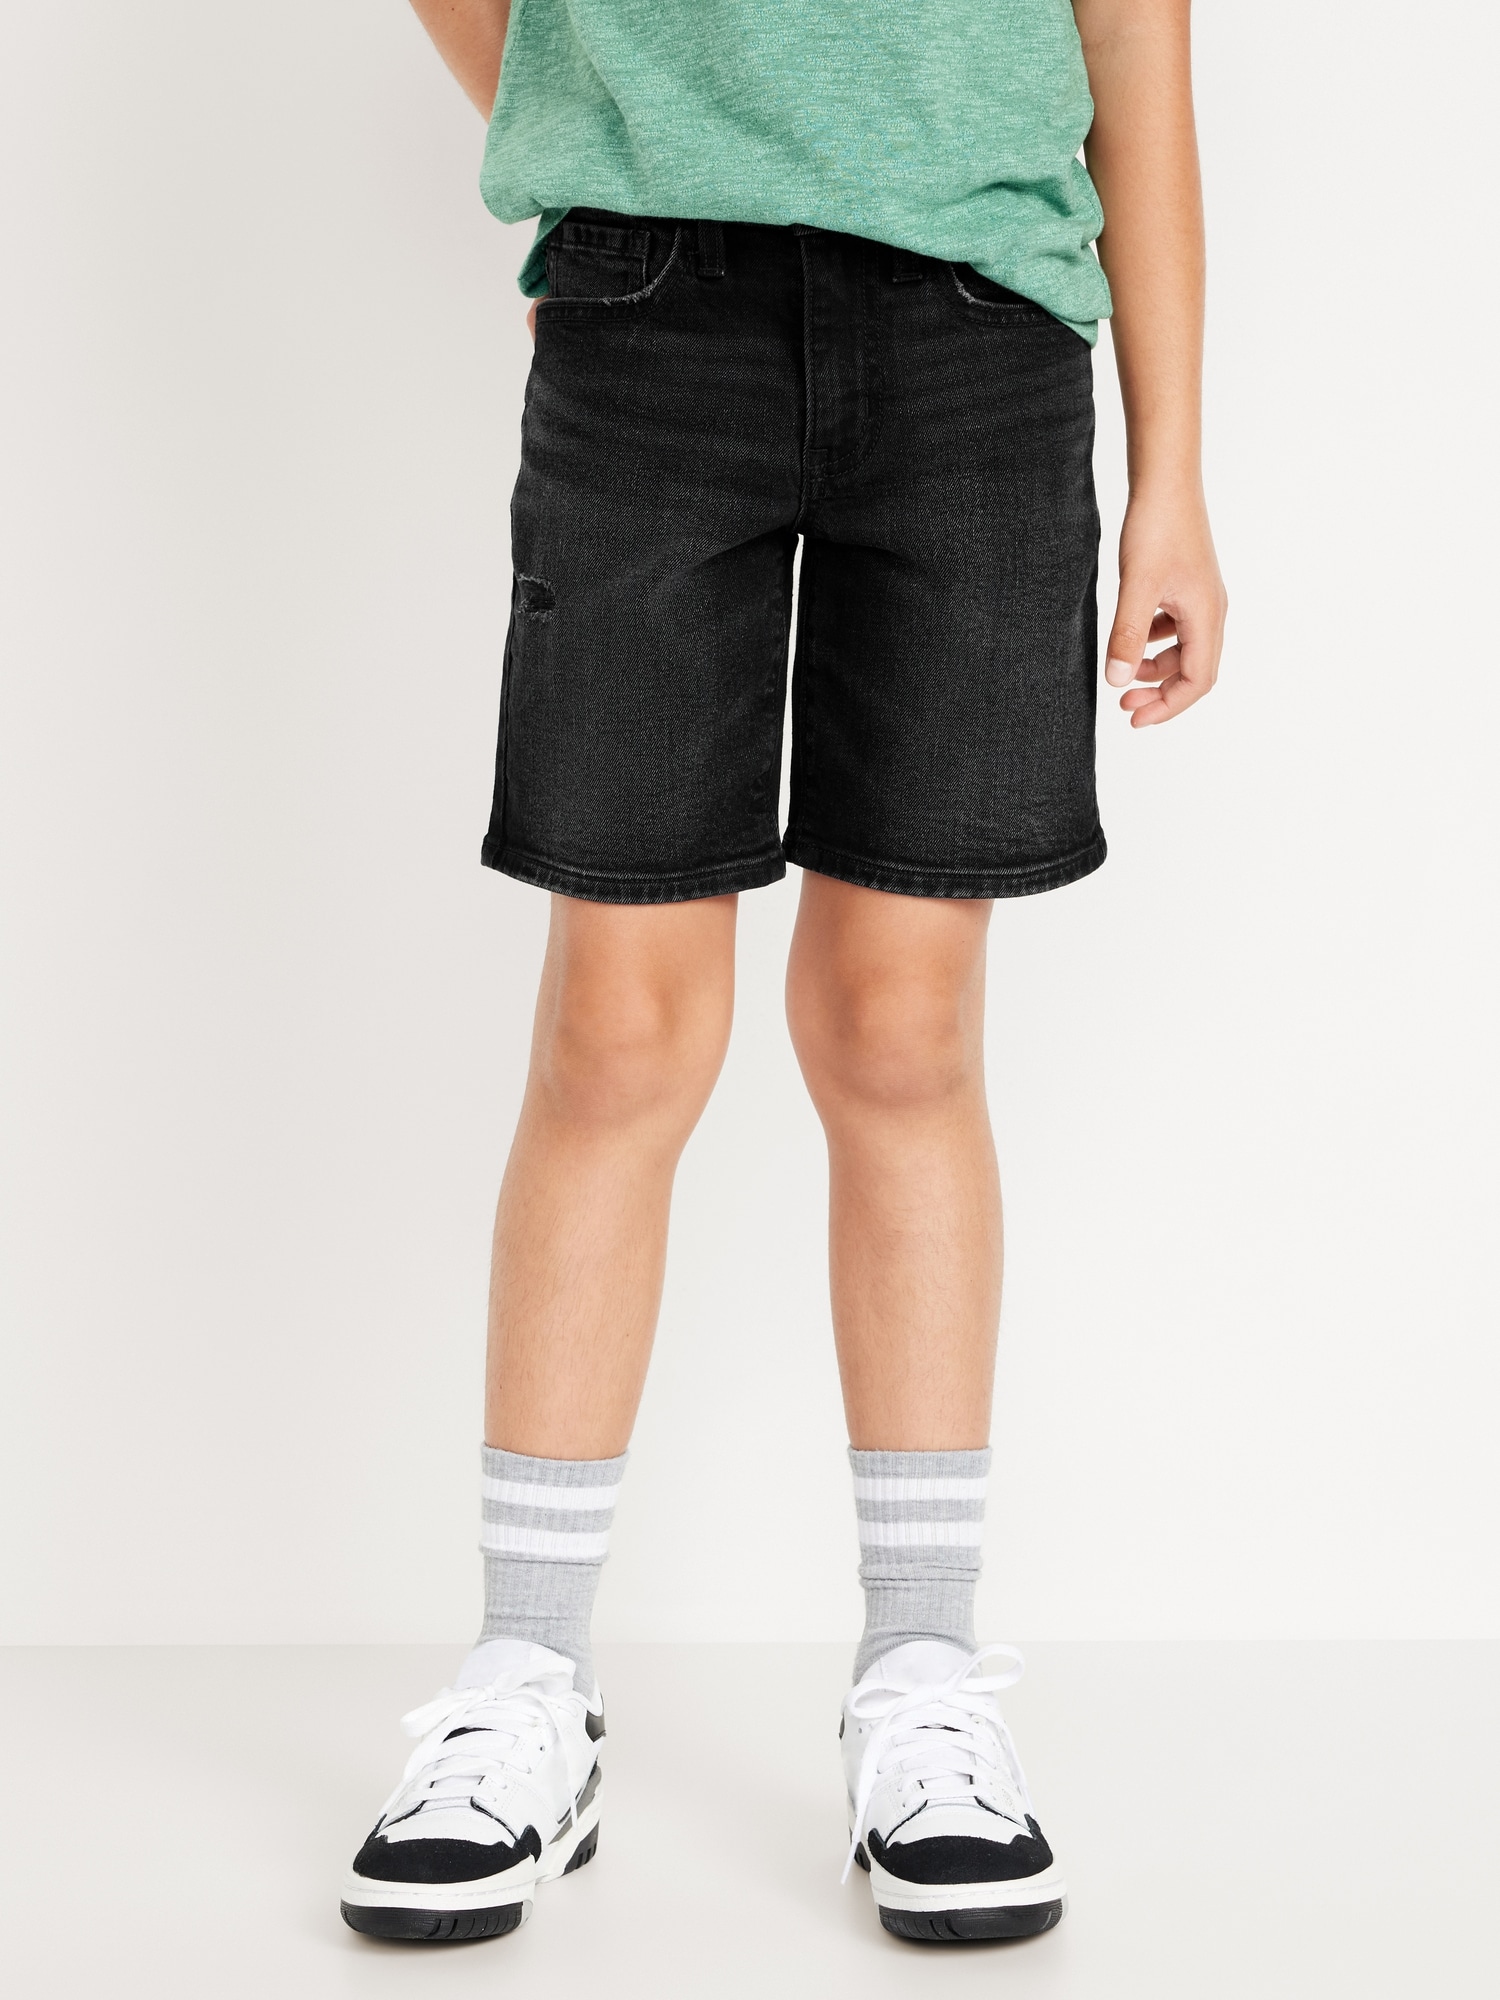 360° Stretch Ripped Jean Shorts for Boys (Above Knee) Hot Deal